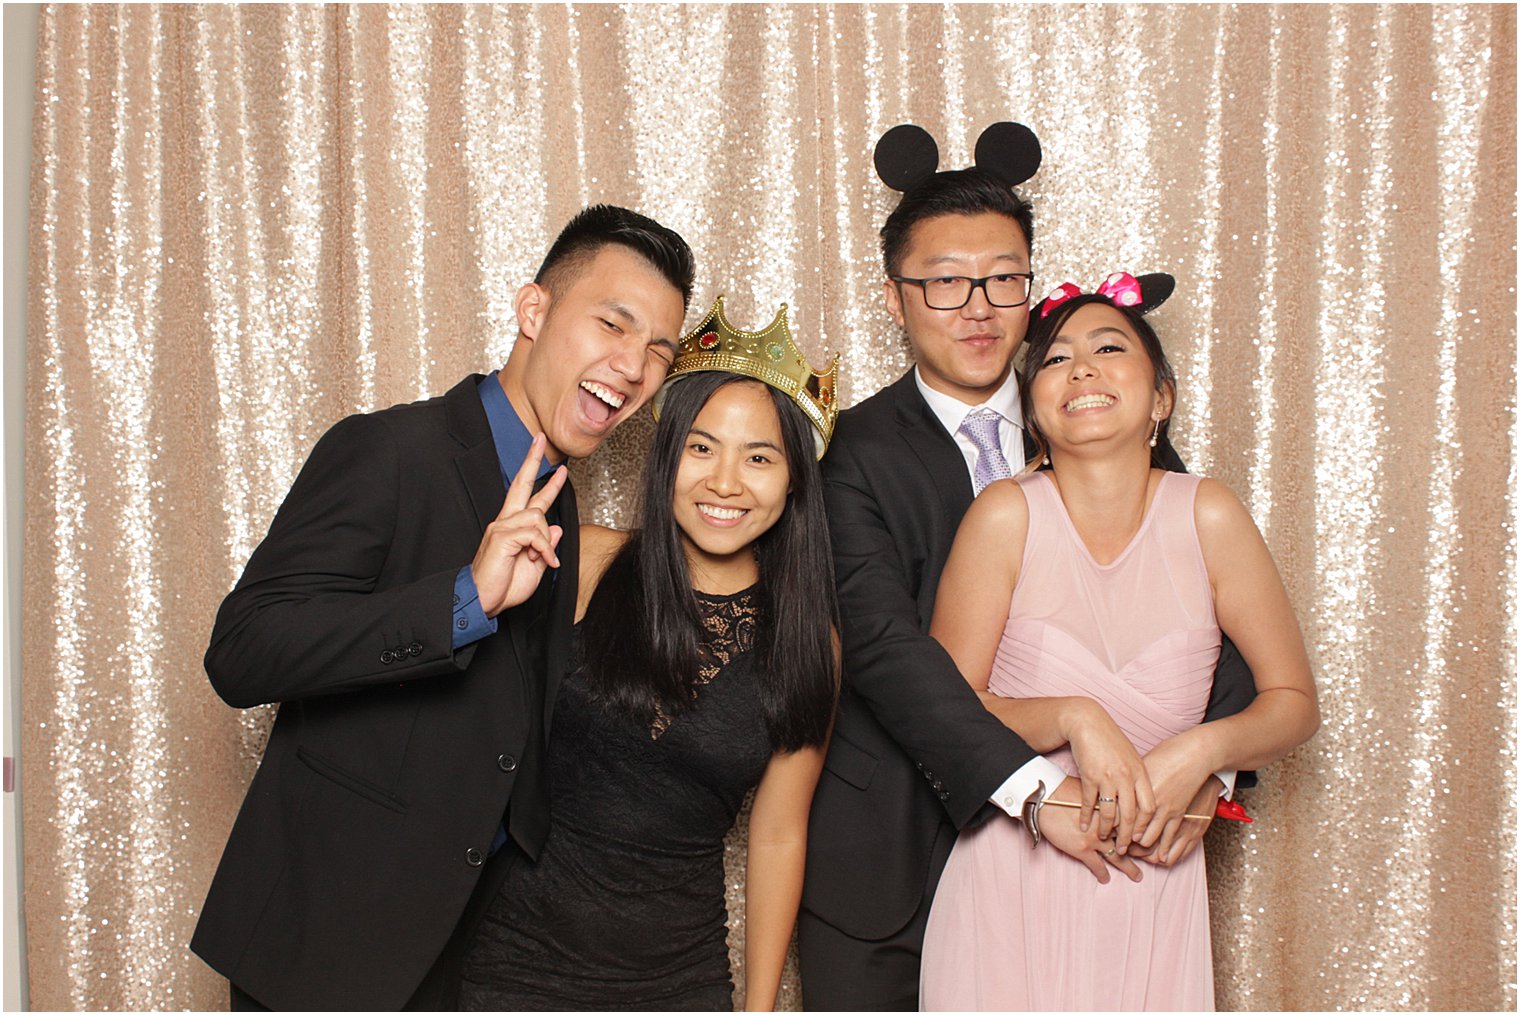 Park Chateau Estate Photo Booth with guests in Mickey ears